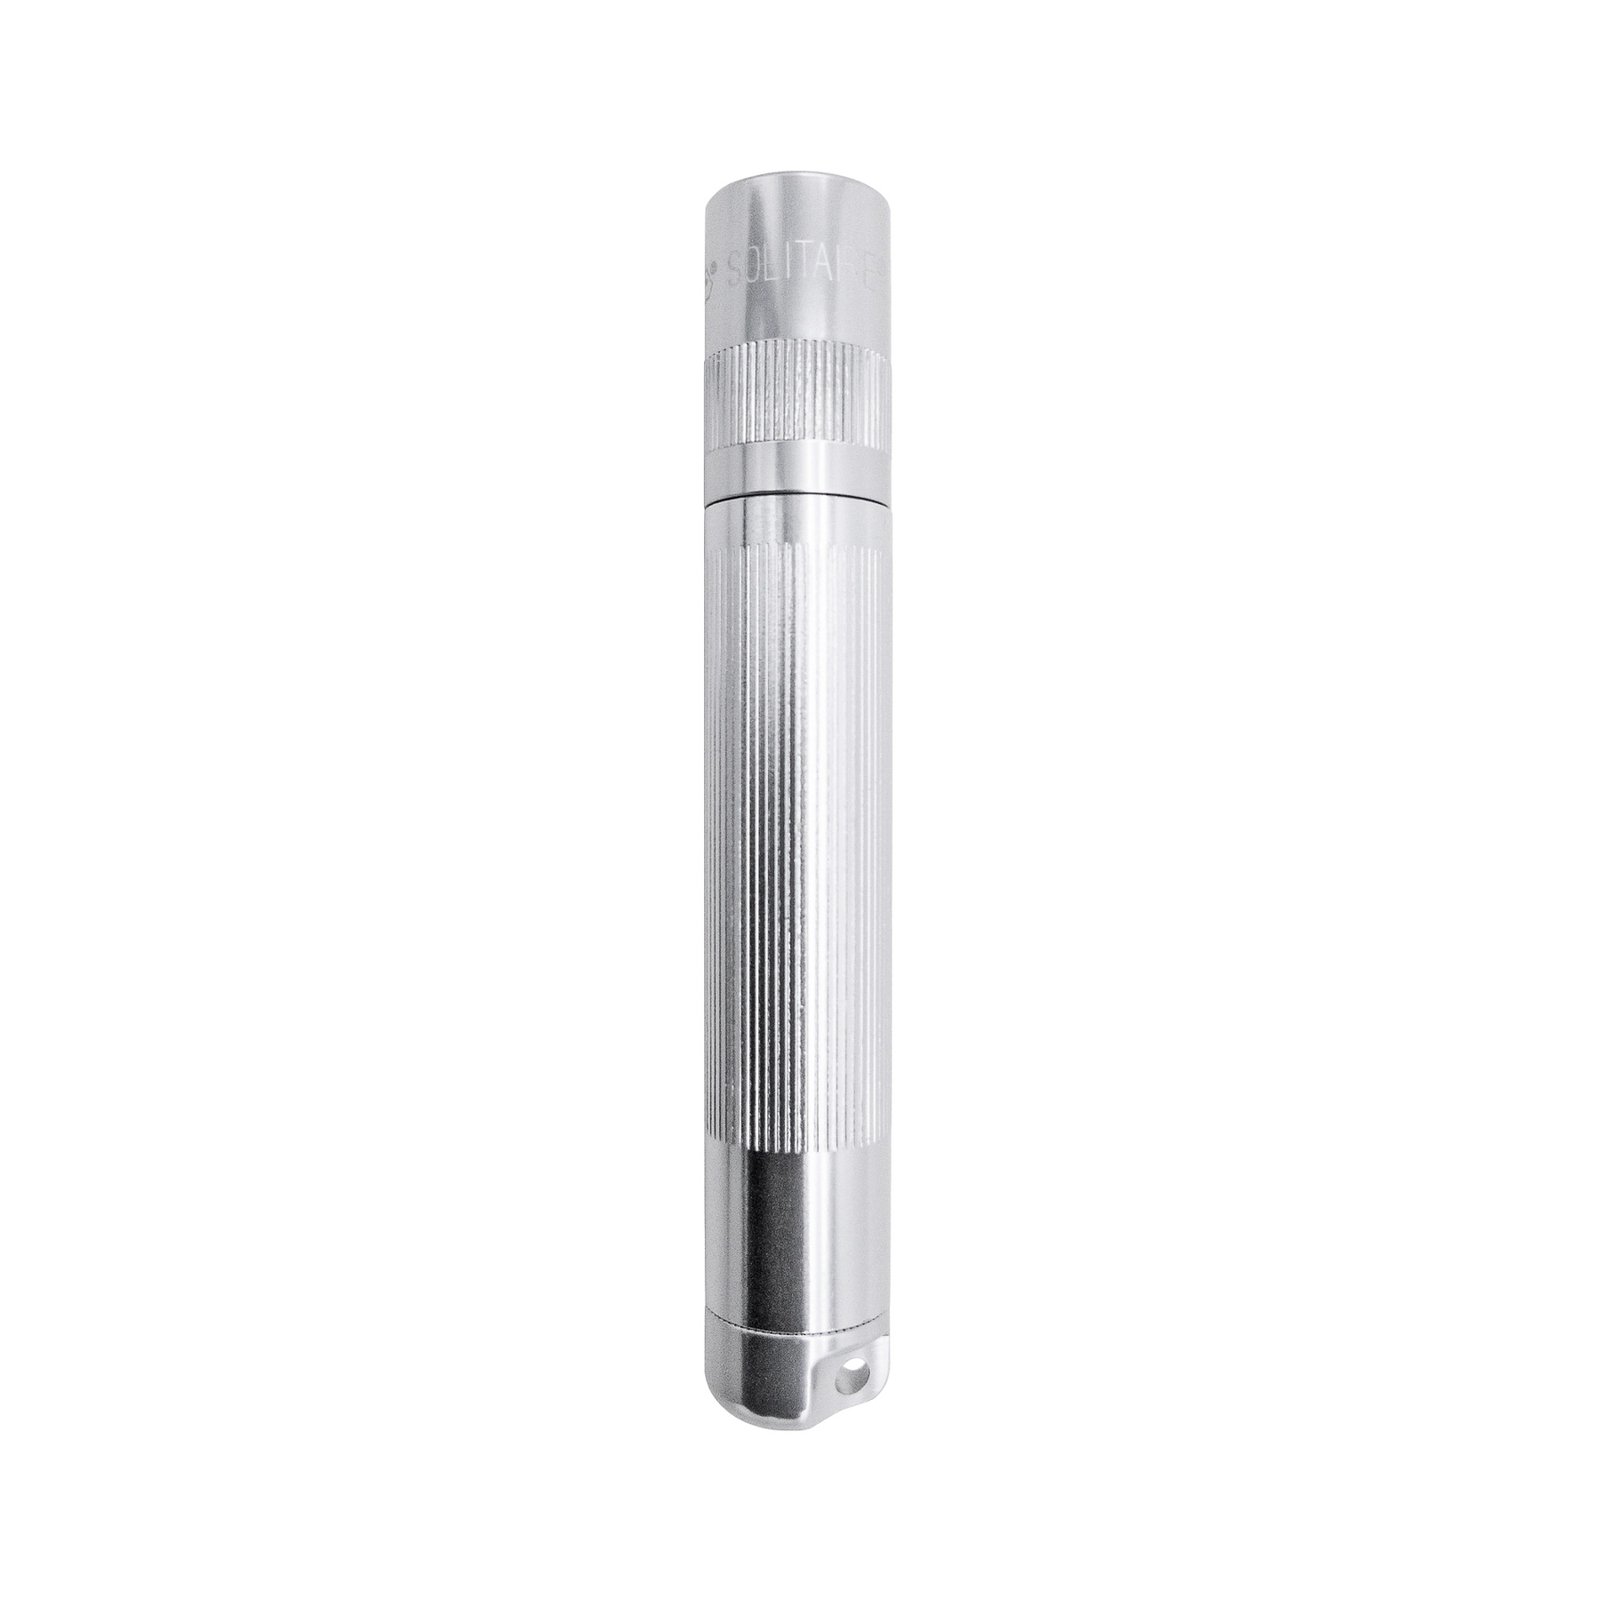 Maglite LED-Taschenlampe Solitaire, 1-Cell AAA, silber